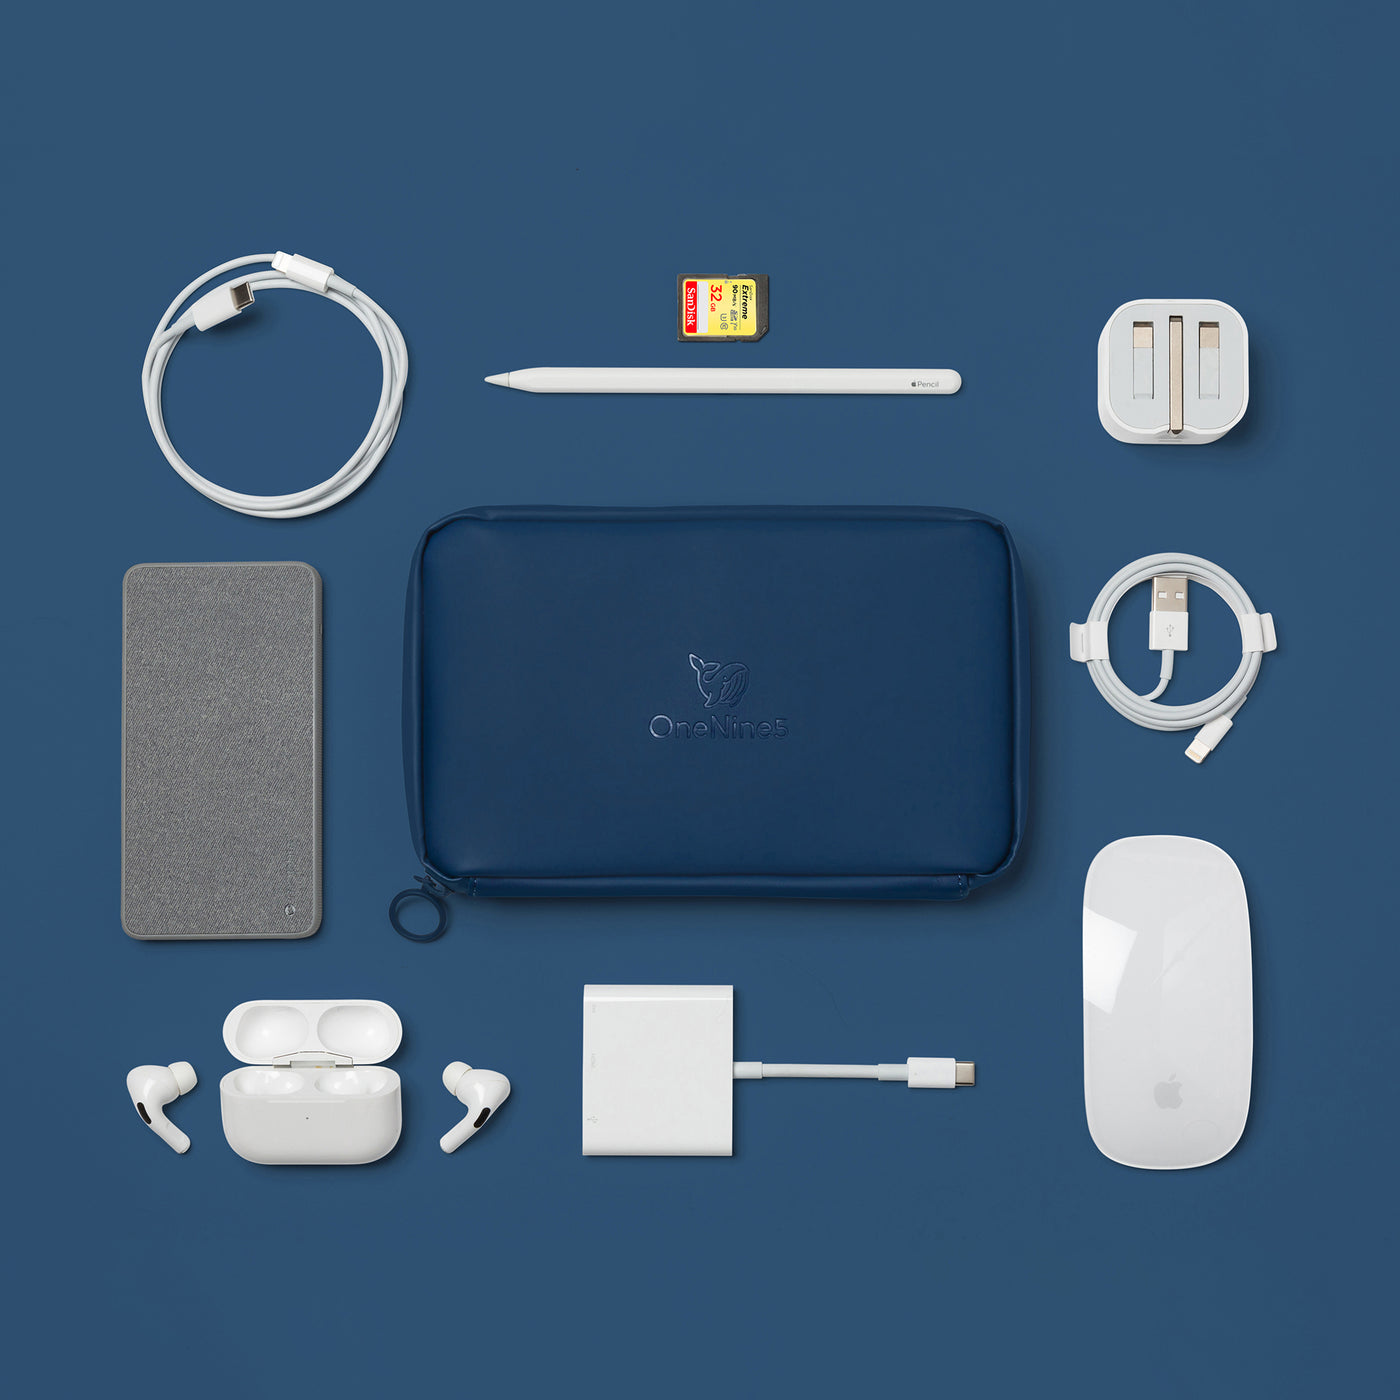 Birdseye image of the Havelock Blue Eco Essentials Pouch on a blue background. the Eco Essentials Pouch is surrounded by a Mophie powerstation mini universal battery, Apple lightning to USB-C cable, Apple pencil, SD card, Apple USB to lightning cable, Apple Mouse, Apple Airpods, USB Power Adapter and Apple USB-C Digital AV Multiport Adapter. These items fit inside the internal pockets and elastic loops.